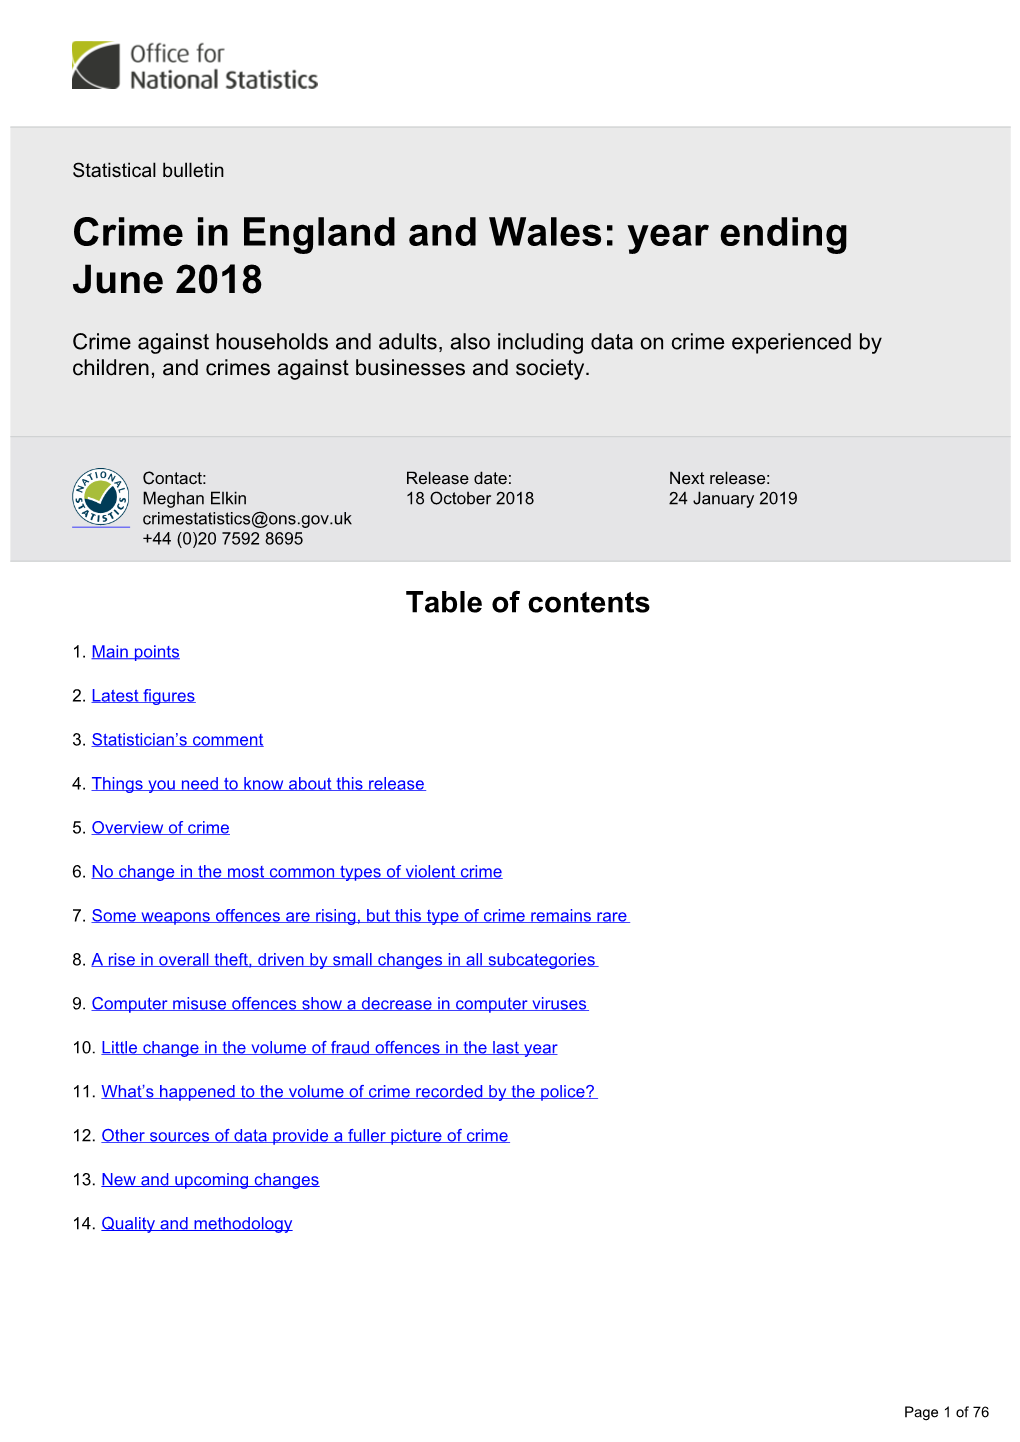 Crime in England and Wales: Year Ending June 2018